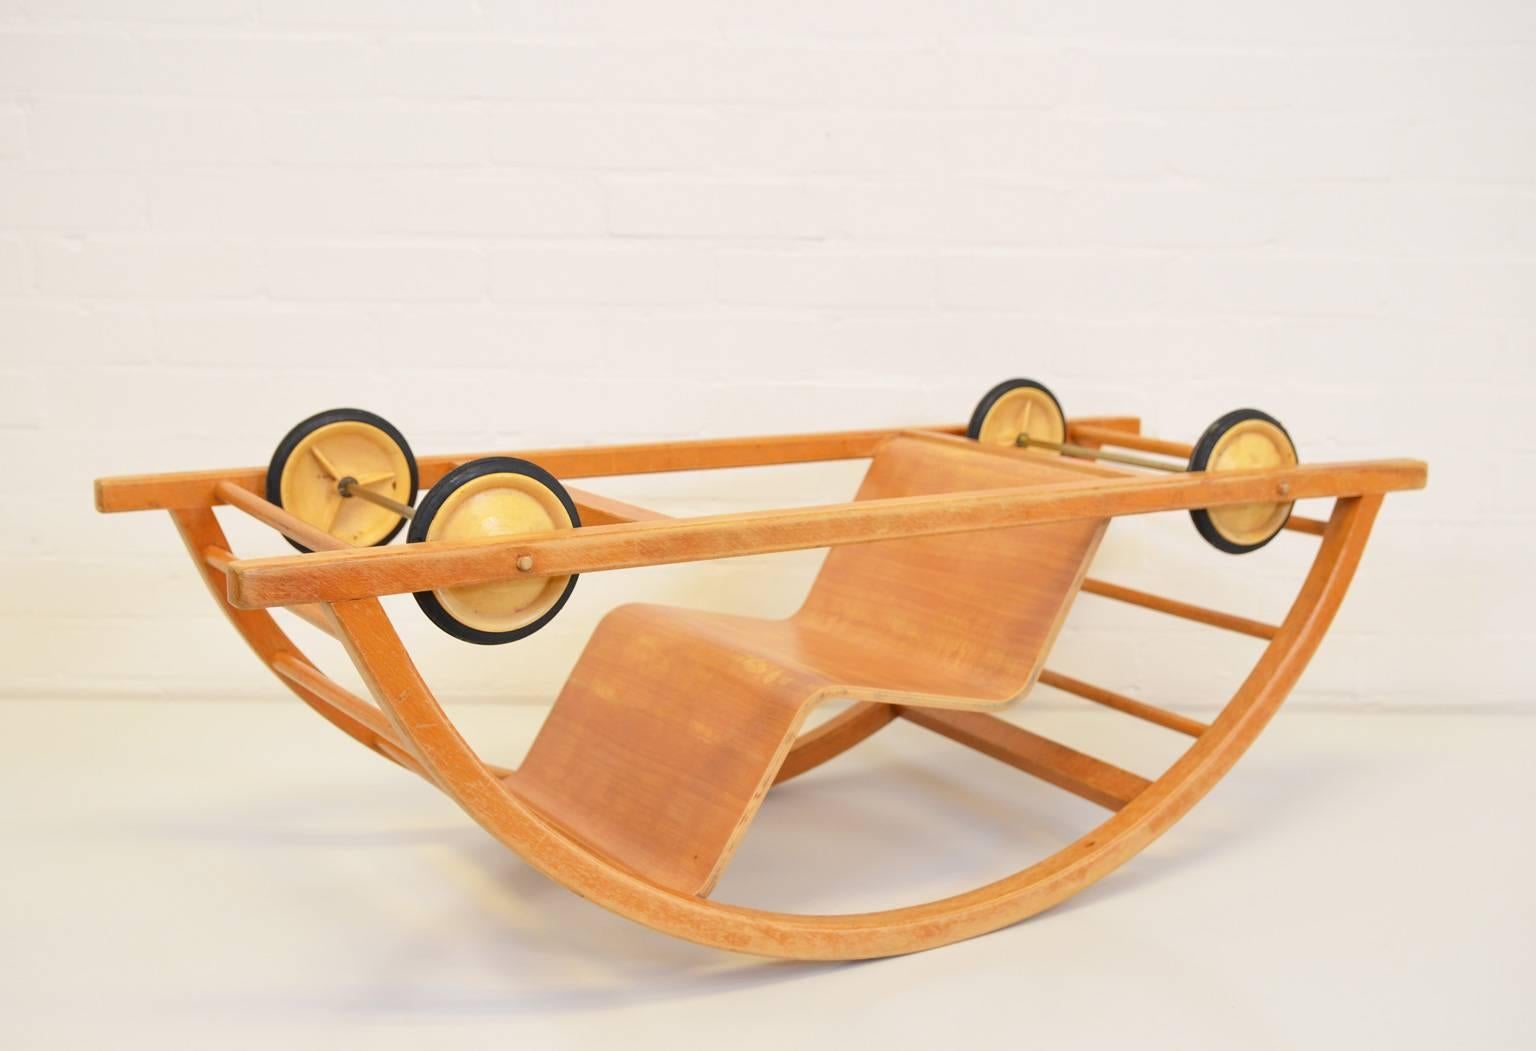 The Schaukelwagen can be used as a toy vehicle or as a rocking chair and is a design by students Hans Brockhage and Erwin Andrä. Both studied at the Academy of Fine Arts in Dresden. The swing car is designed under the supervision of Mart Stam who